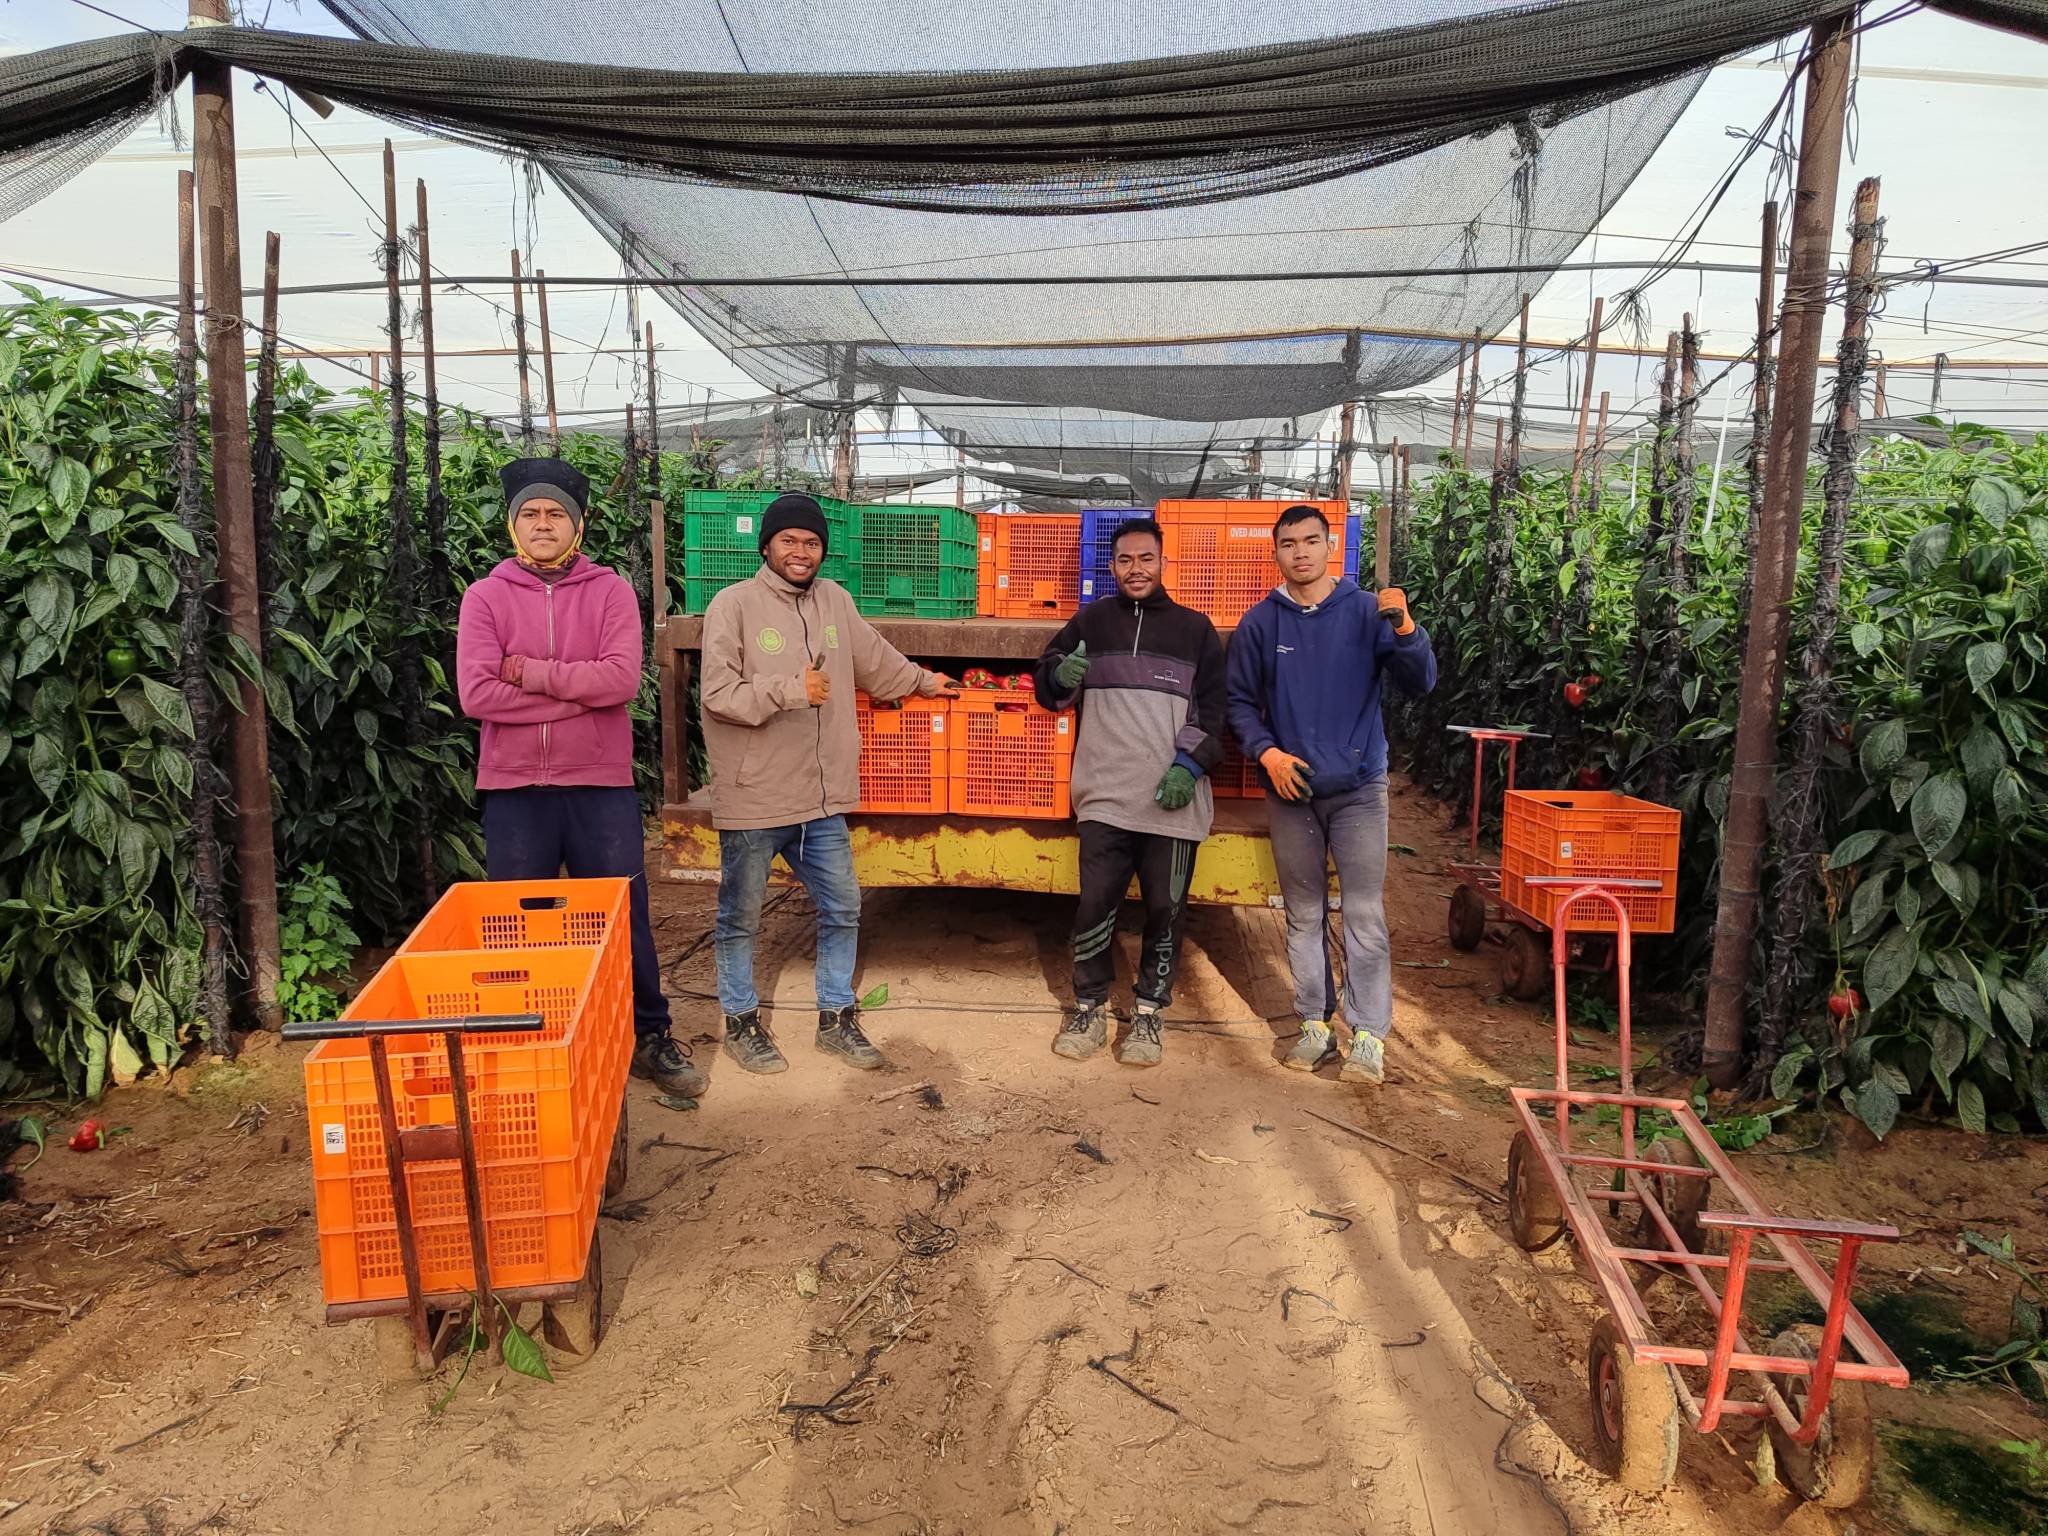 Indonesian agricultural interns at work in the fields of Moshav Paran in the Arava Valley. (Arava International Center for Agriculture Training)